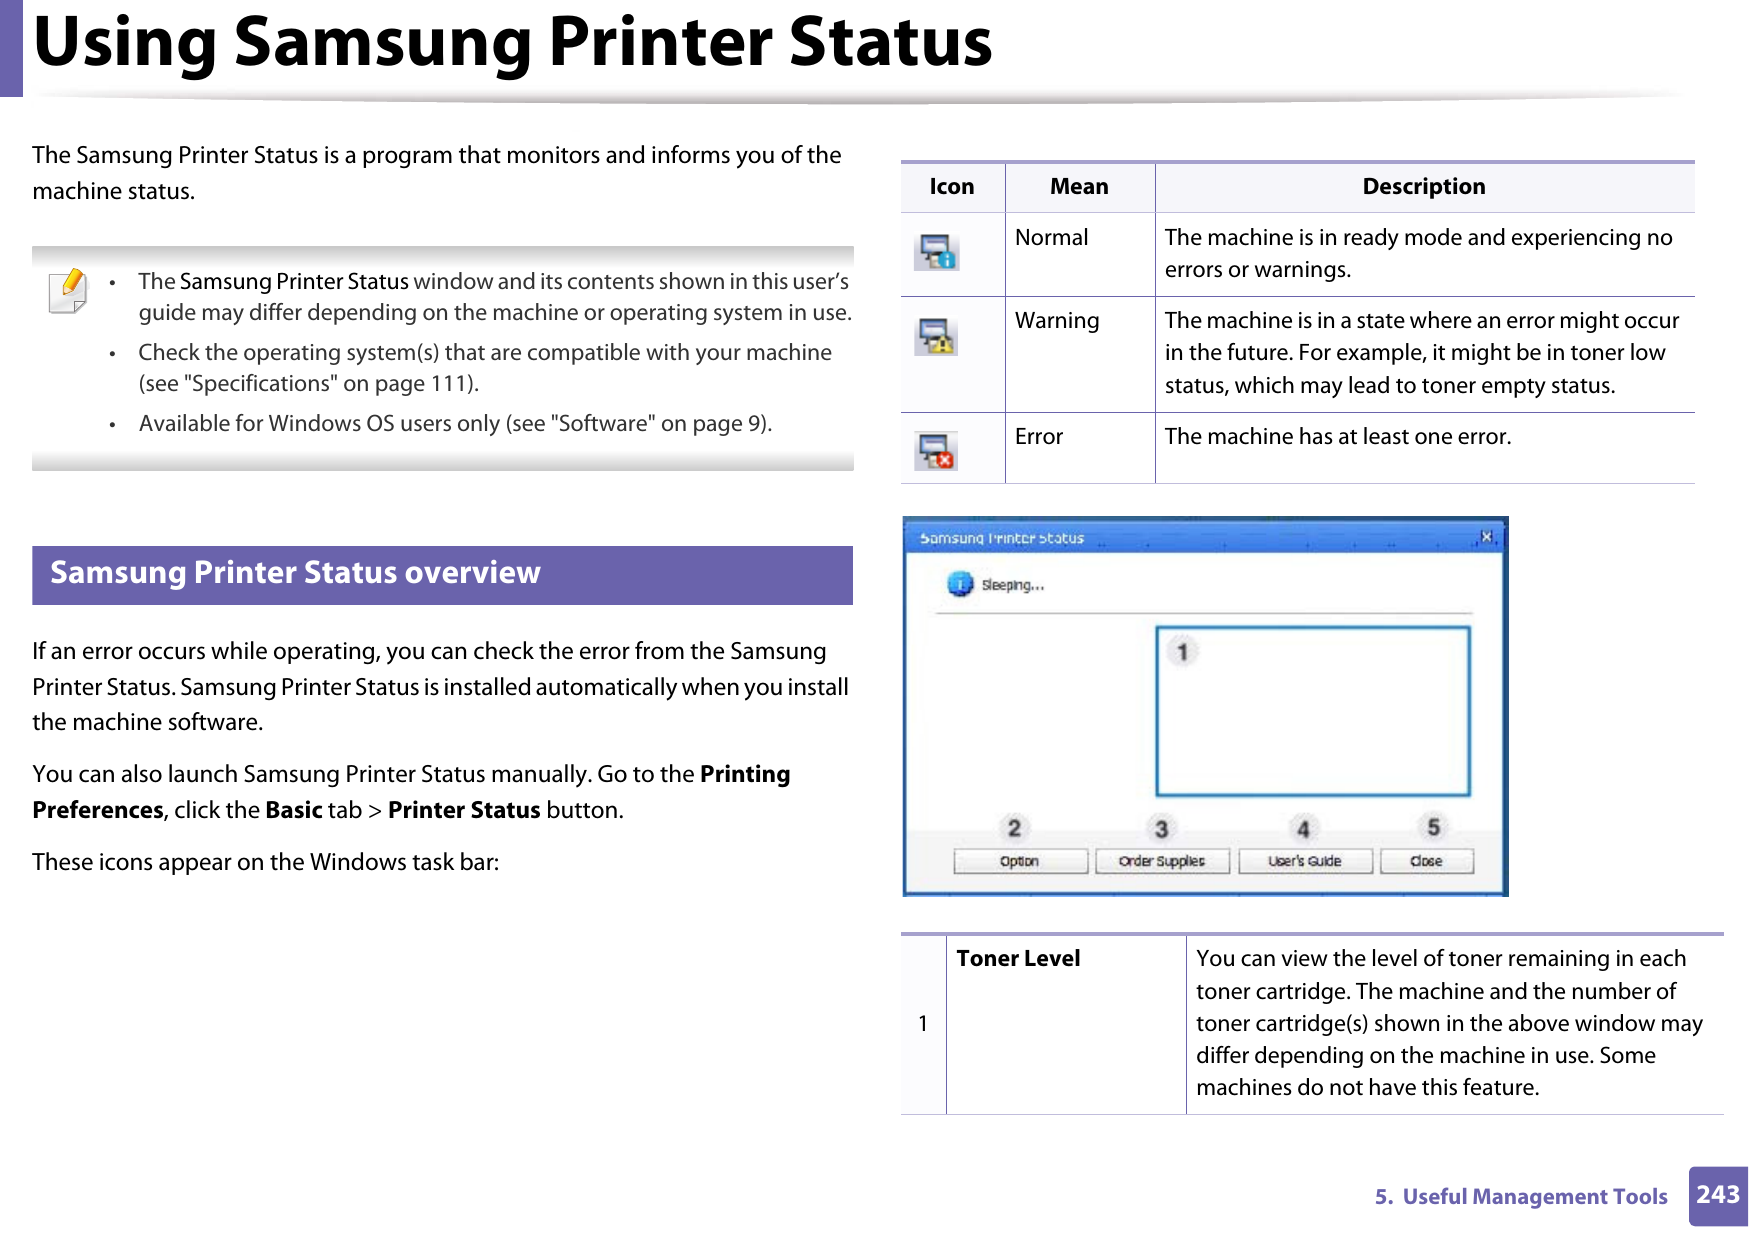 2435.  Useful Management ToolsUsing Samsung Printer Status The Samsung Printer Status is a program that monitors and informs you of the machine status.  • The Samsung Printer Status window and its contents shown in this user’s guide may differ depending on the machine or operating system in use.• Check the operating system(s) that are compatible with your machine (see &quot;Specifications&quot; on page 111).• Available for Windows OS users only (see &quot;Software&quot; on page 9). 7 Samsung Printer Status overviewIf an error occurs while operating, you can check the error from the Samsung Printer Status. Samsung Printer Status is installed automatically when you install the machine software. You can also launch Samsung Printer Status manually. Go to the Printing Preferences, click the Basic tab &gt; Printer Status button.These icons appear on the Windows task bar:Icon Mean DescriptionNormal The machine is in ready mode and experiencing no errors or warnings.Warning The machine is in a state where an error might occur in the future. For example, it might be in toner low status, which may lead to toner empty status. Error The machine has at least one error.1Toner Level You can view the level of toner remaining in each toner cartridge. The machine and the number of toner cartridge(s) shown in the above window may differ depending on the machine in use. Some machines do not have this feature.